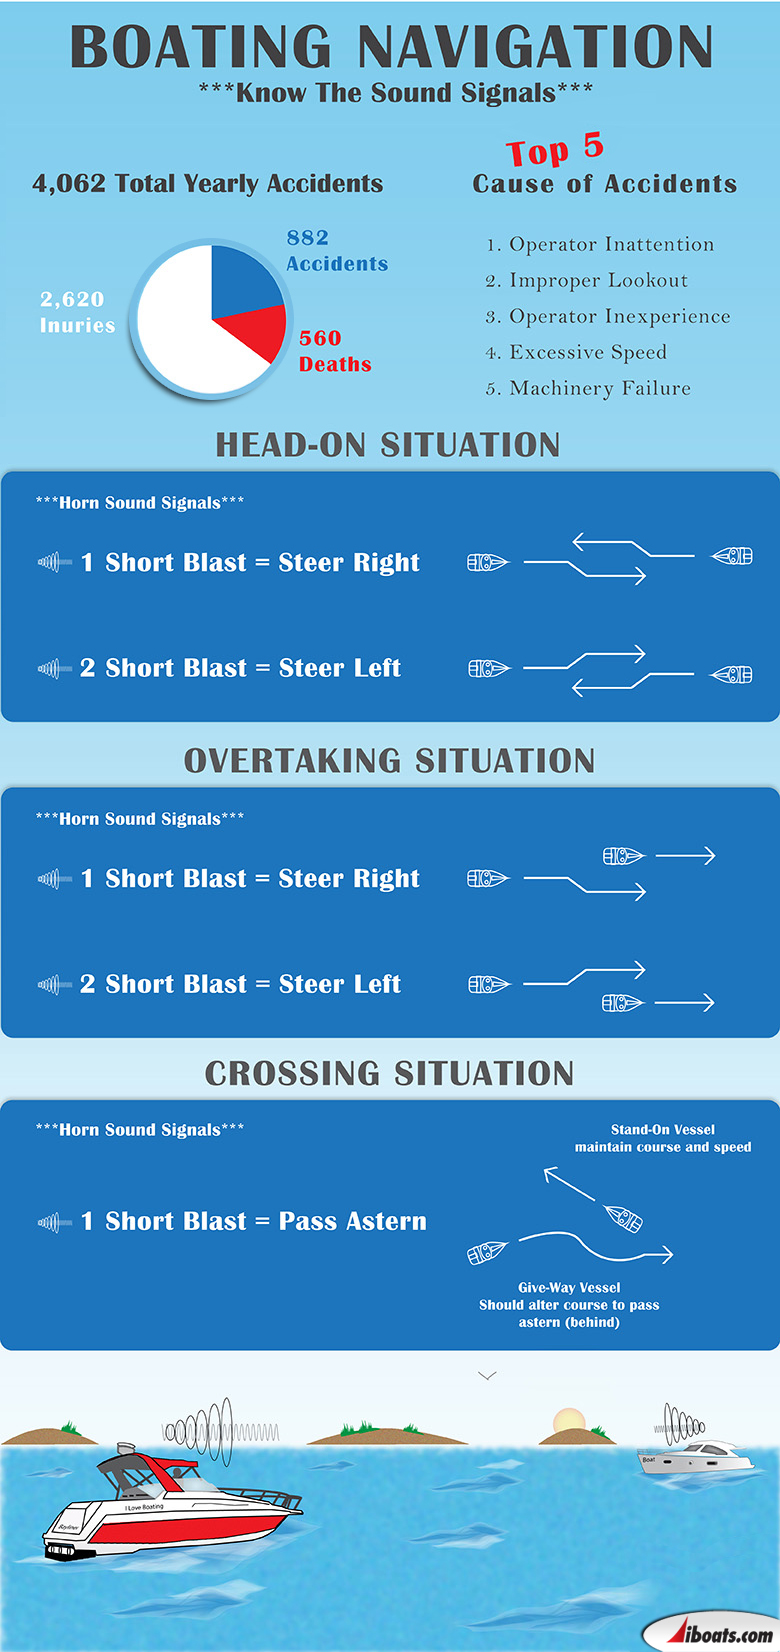 Infographic on boating navigation and horn sound communication